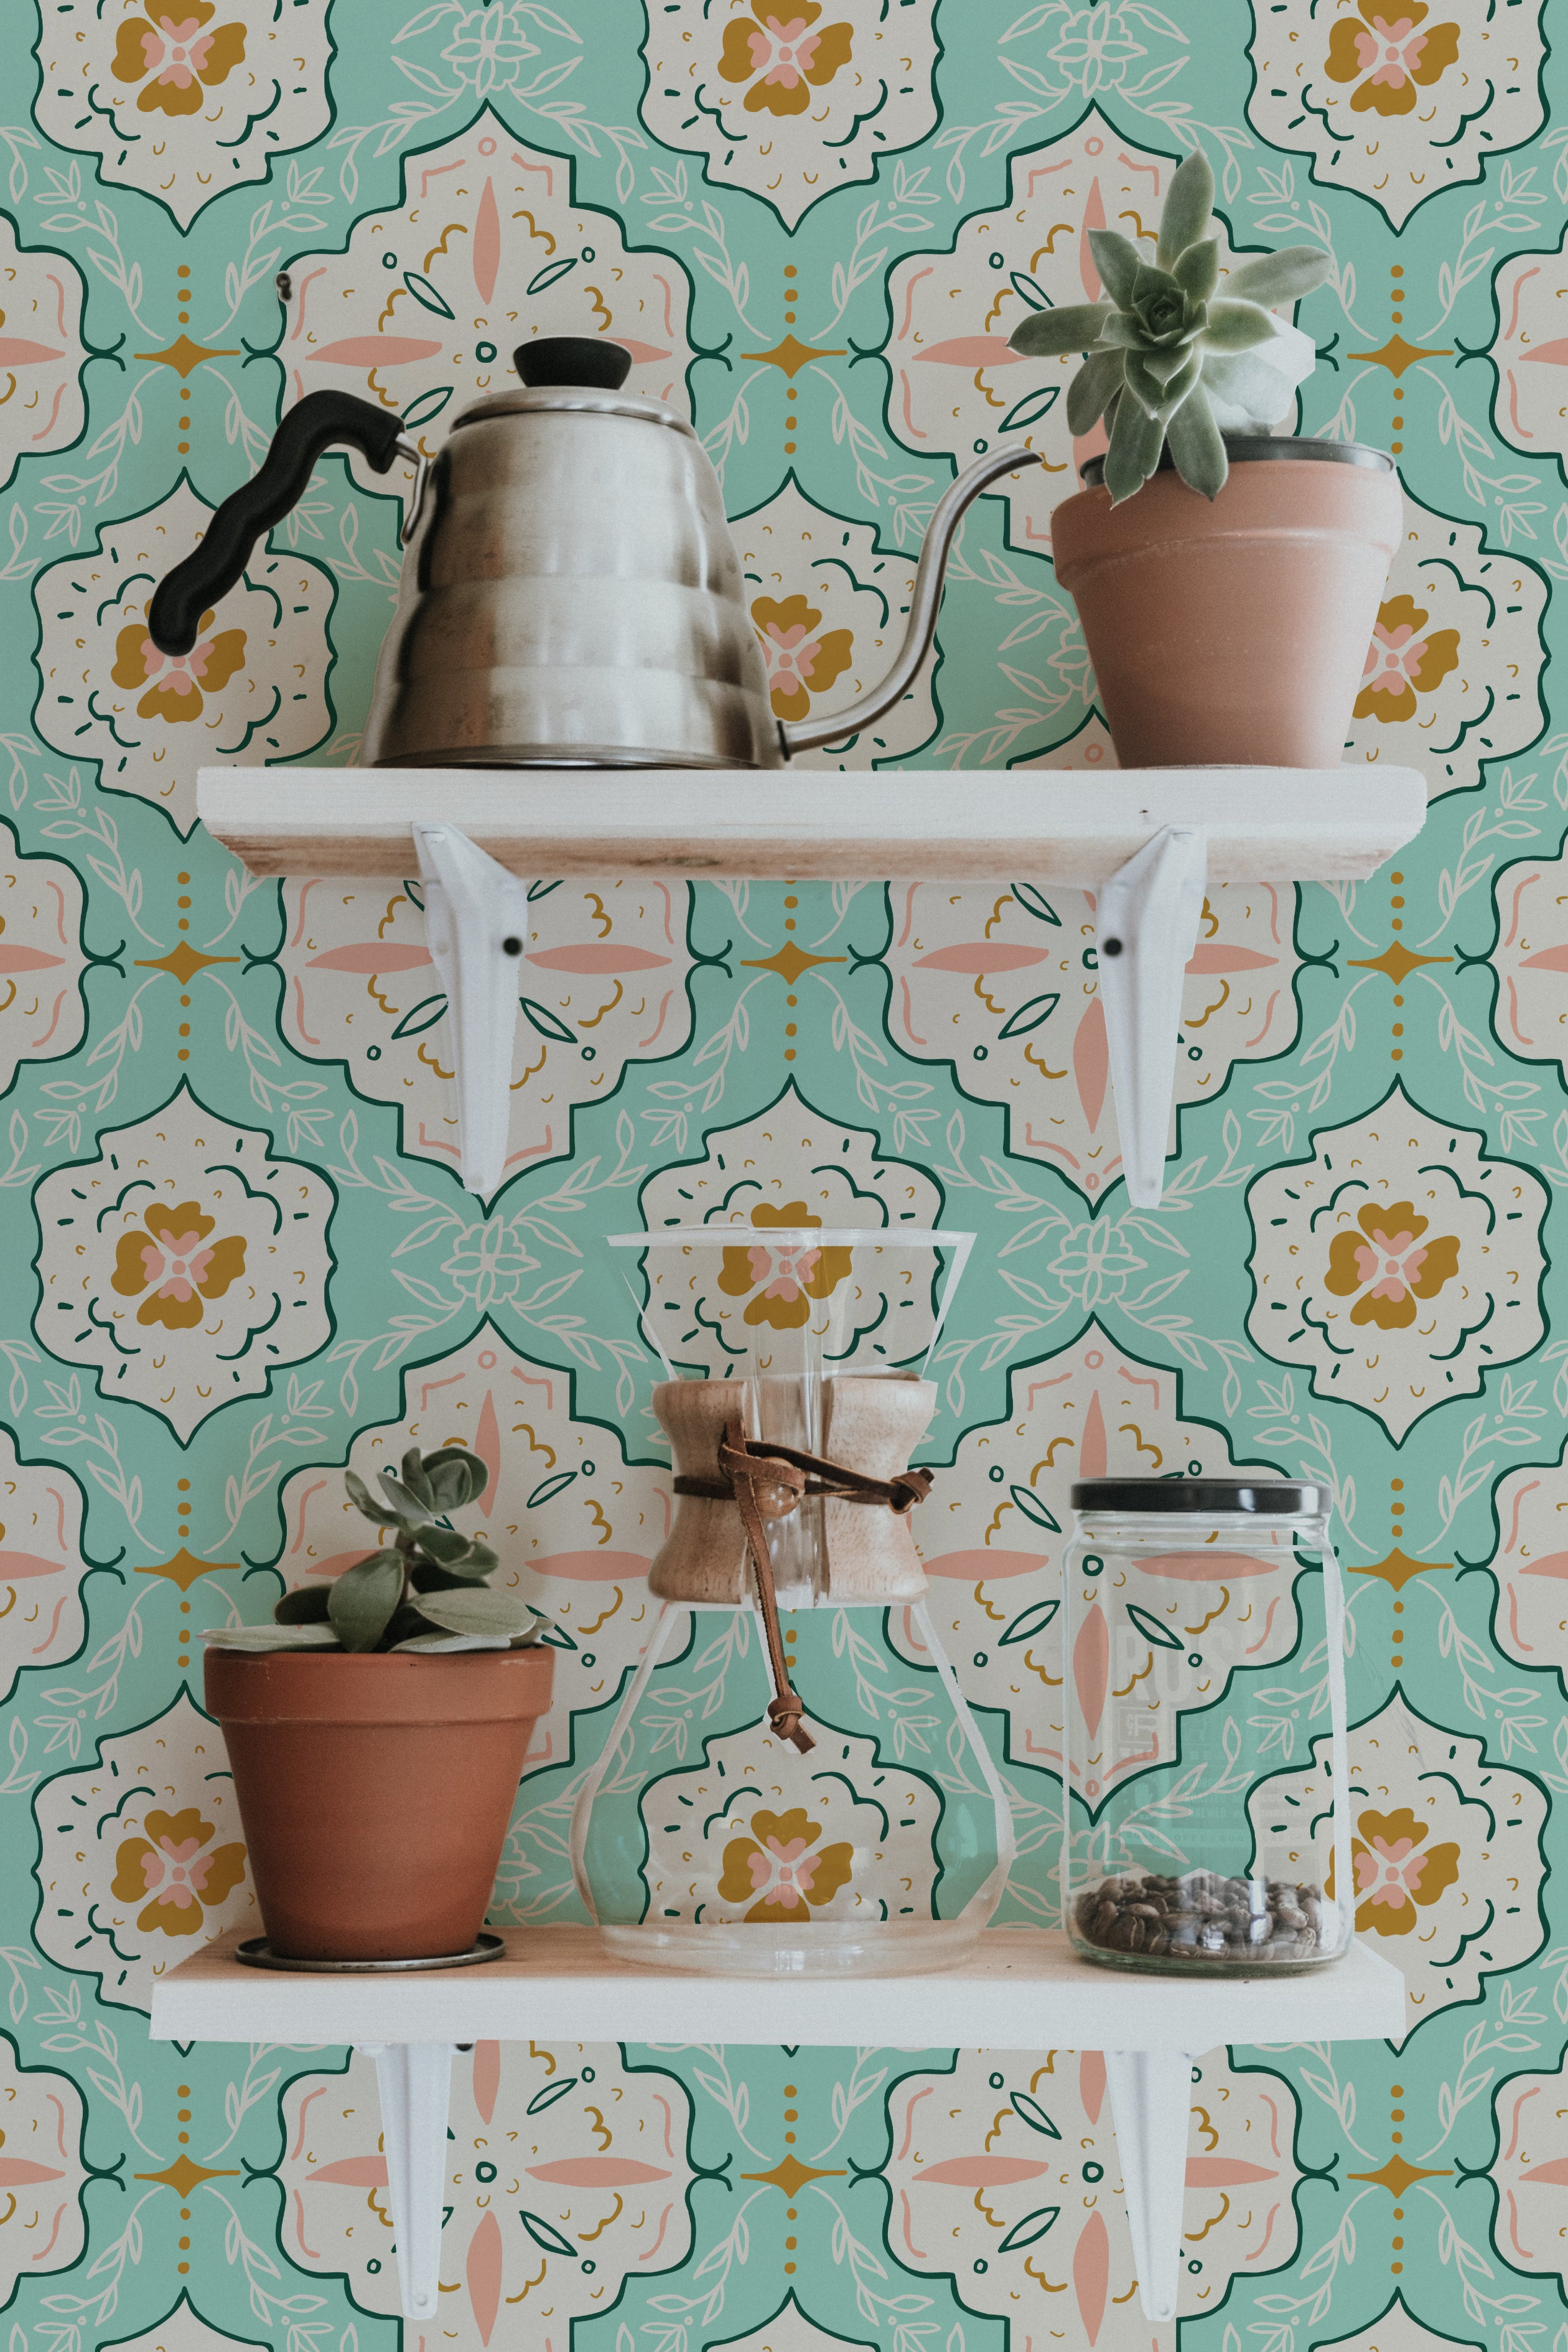 Wall-mounted shelves against a background of Fatima Tile Wallpaper with a detailed Moroccan tile design in turquoise, adorned with various houseplants and kitchen utensils.